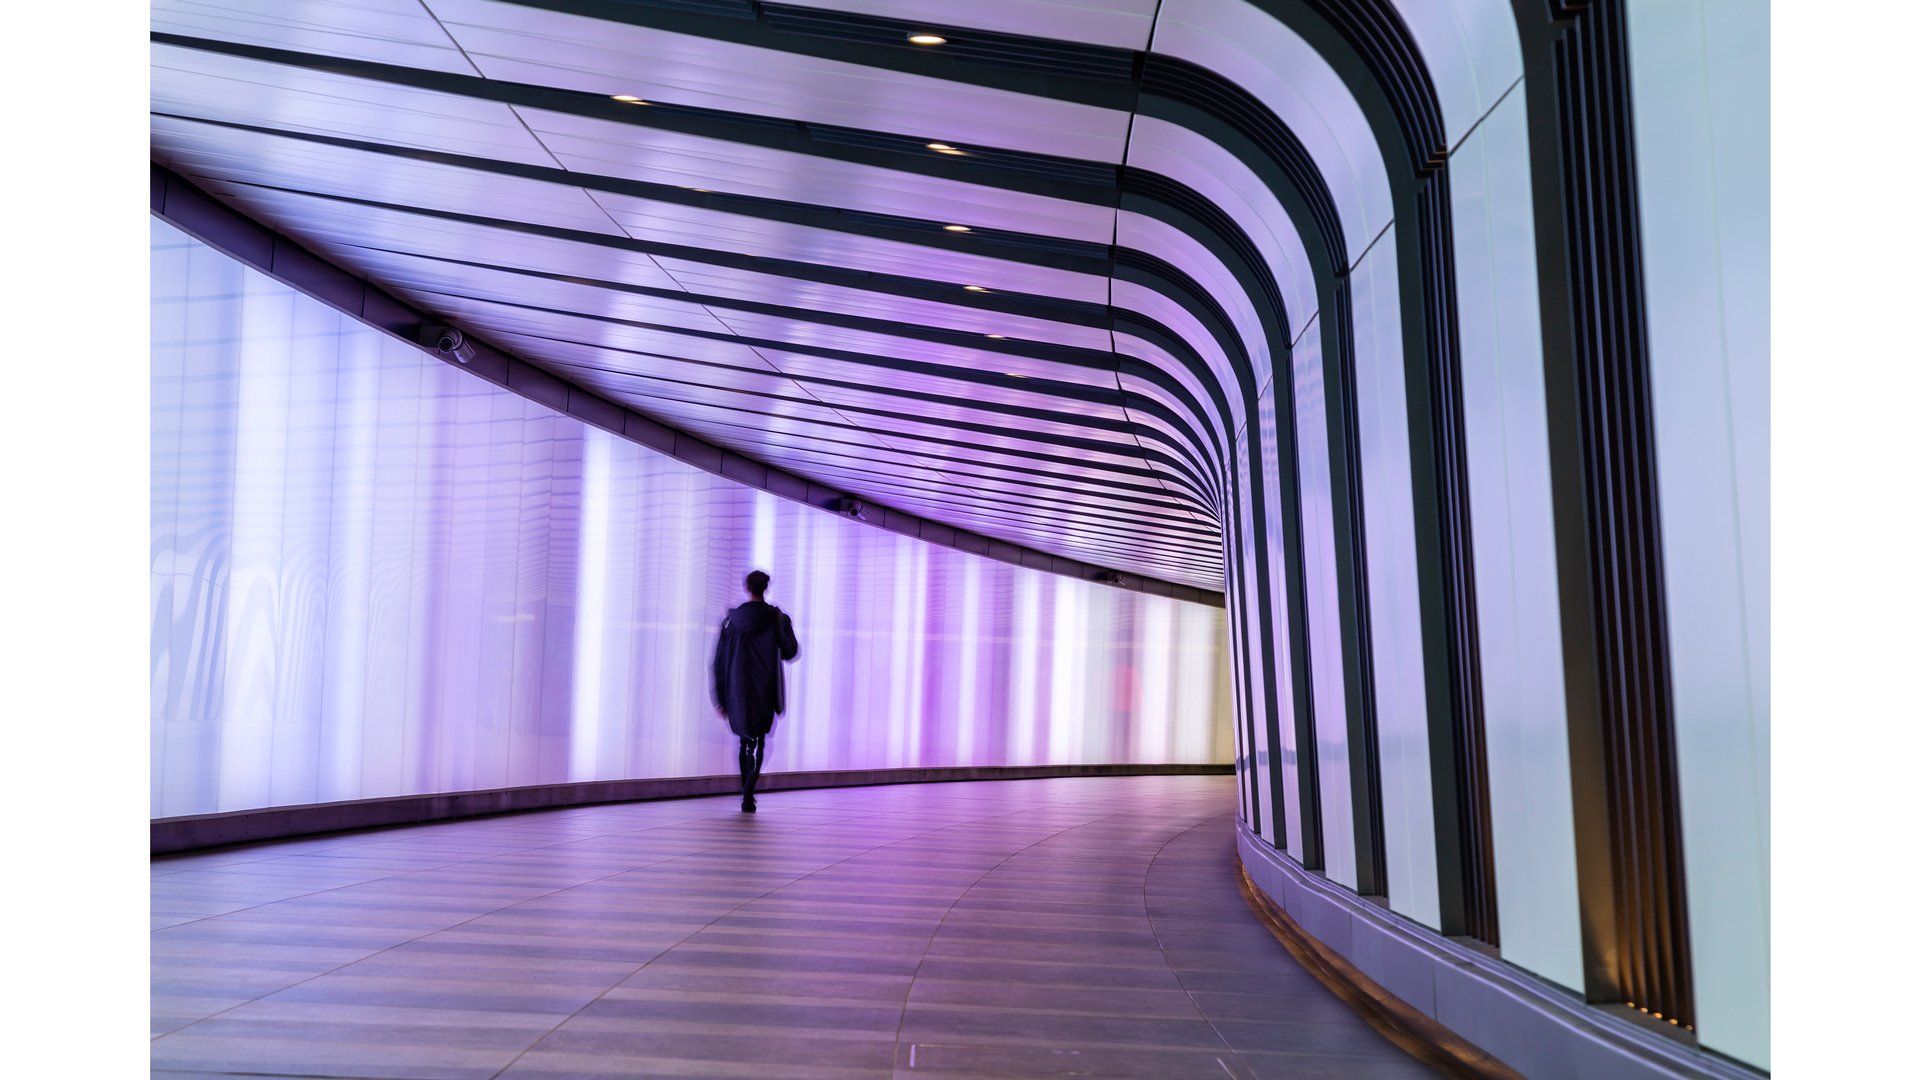 A person walks through a wide white and black tunnel with a purple light.